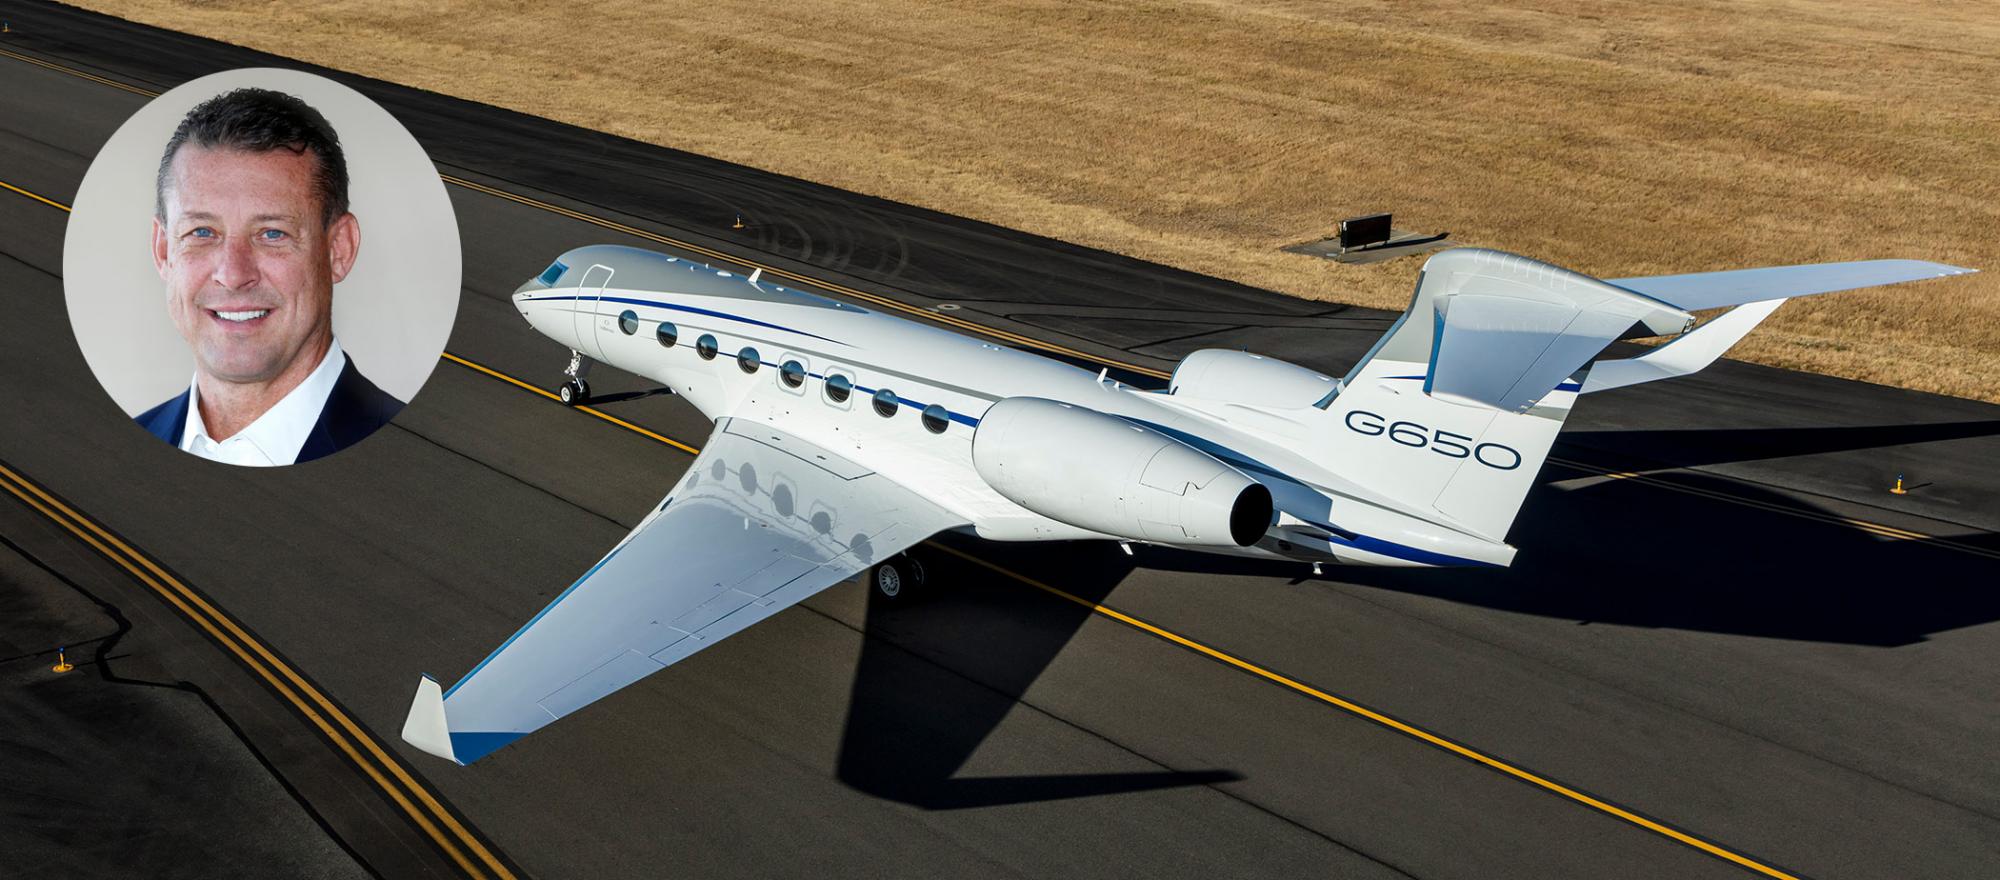 With New Bizjets On the Runway, Preowned Inventory Loosens Up 